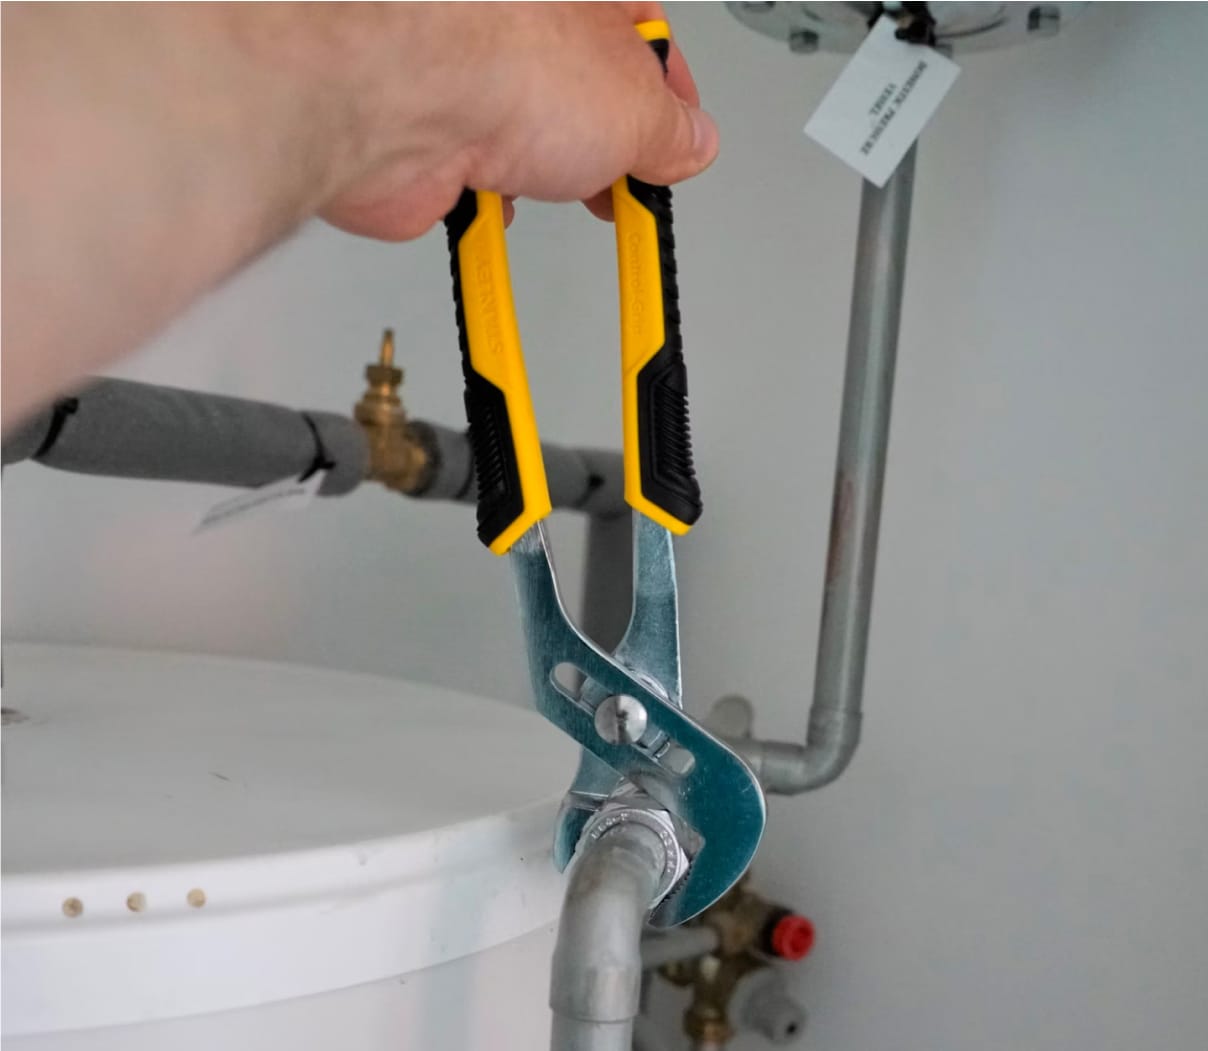 Hand holding a wrench tightening plumbing pipes